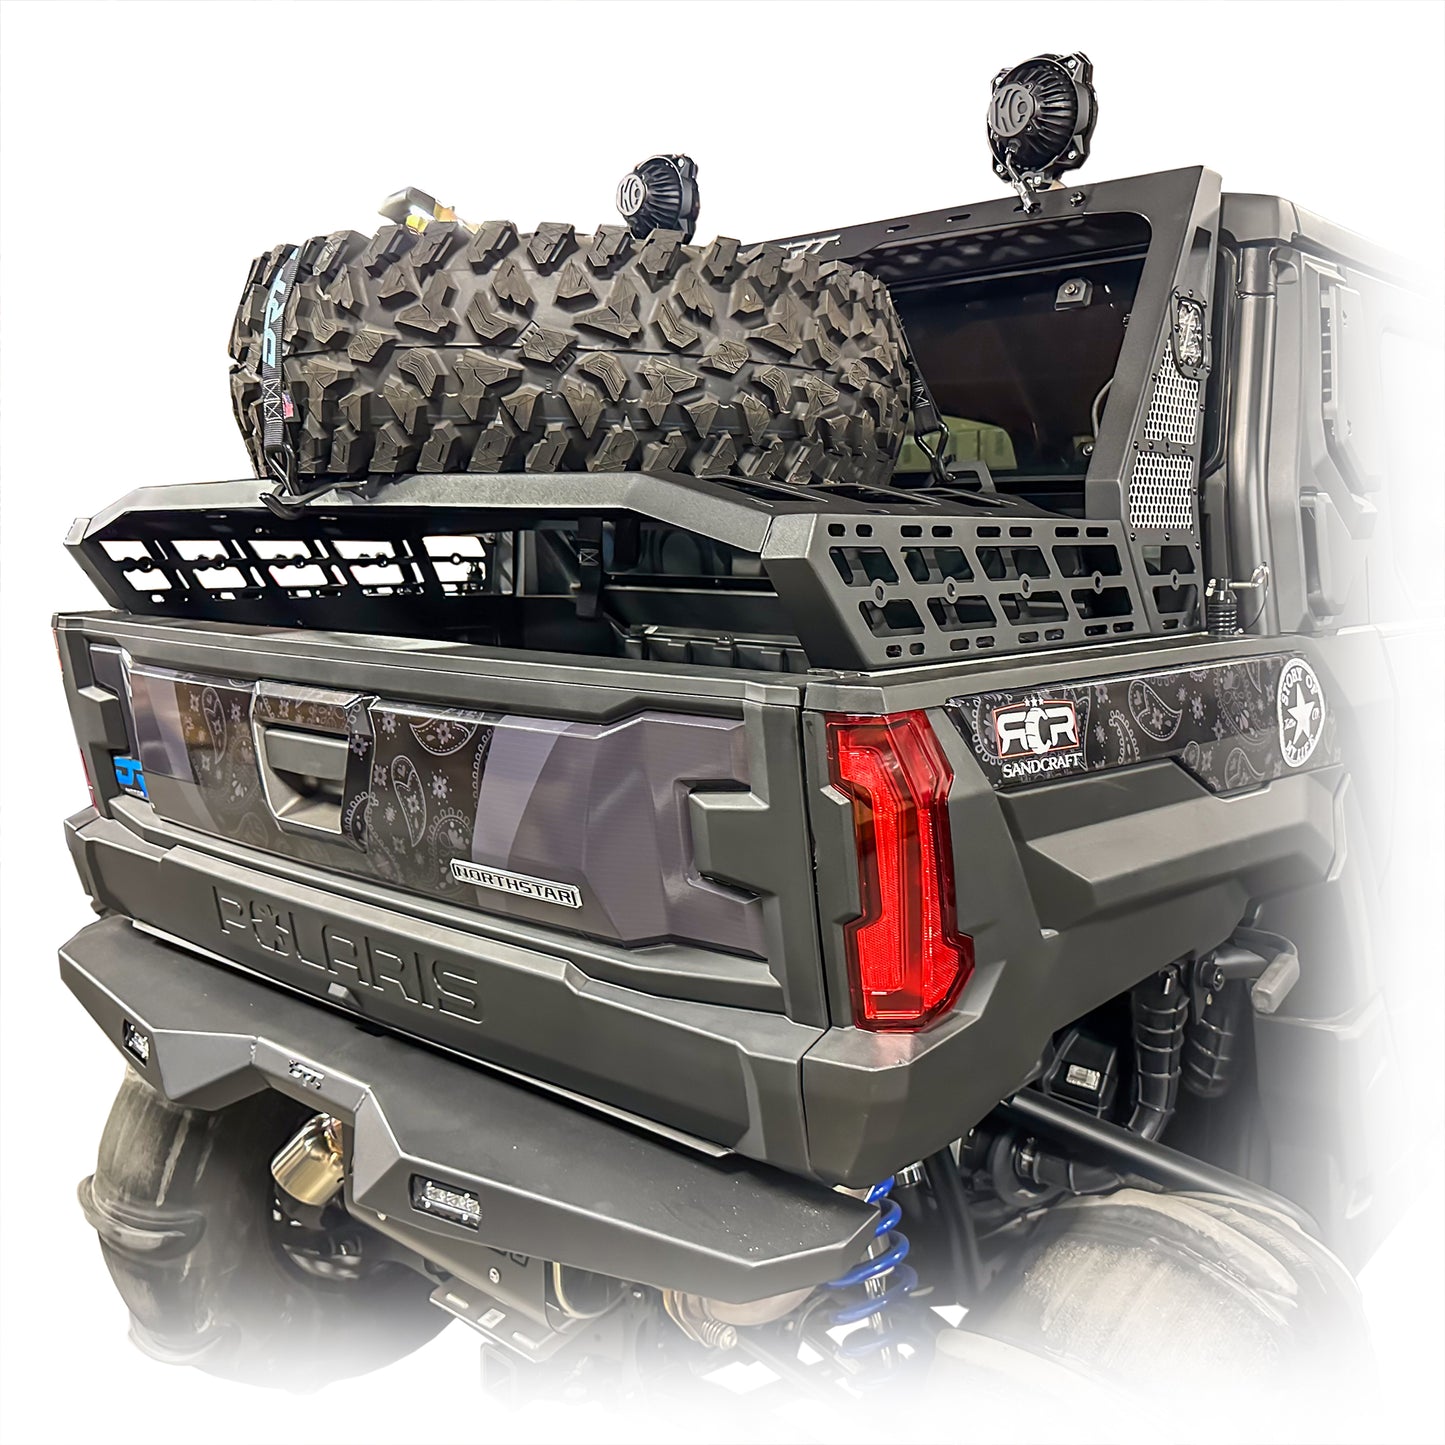 DRT Motorsports Polaris XPEDITION Tire Carrier / Chase Rack System with spare mounted